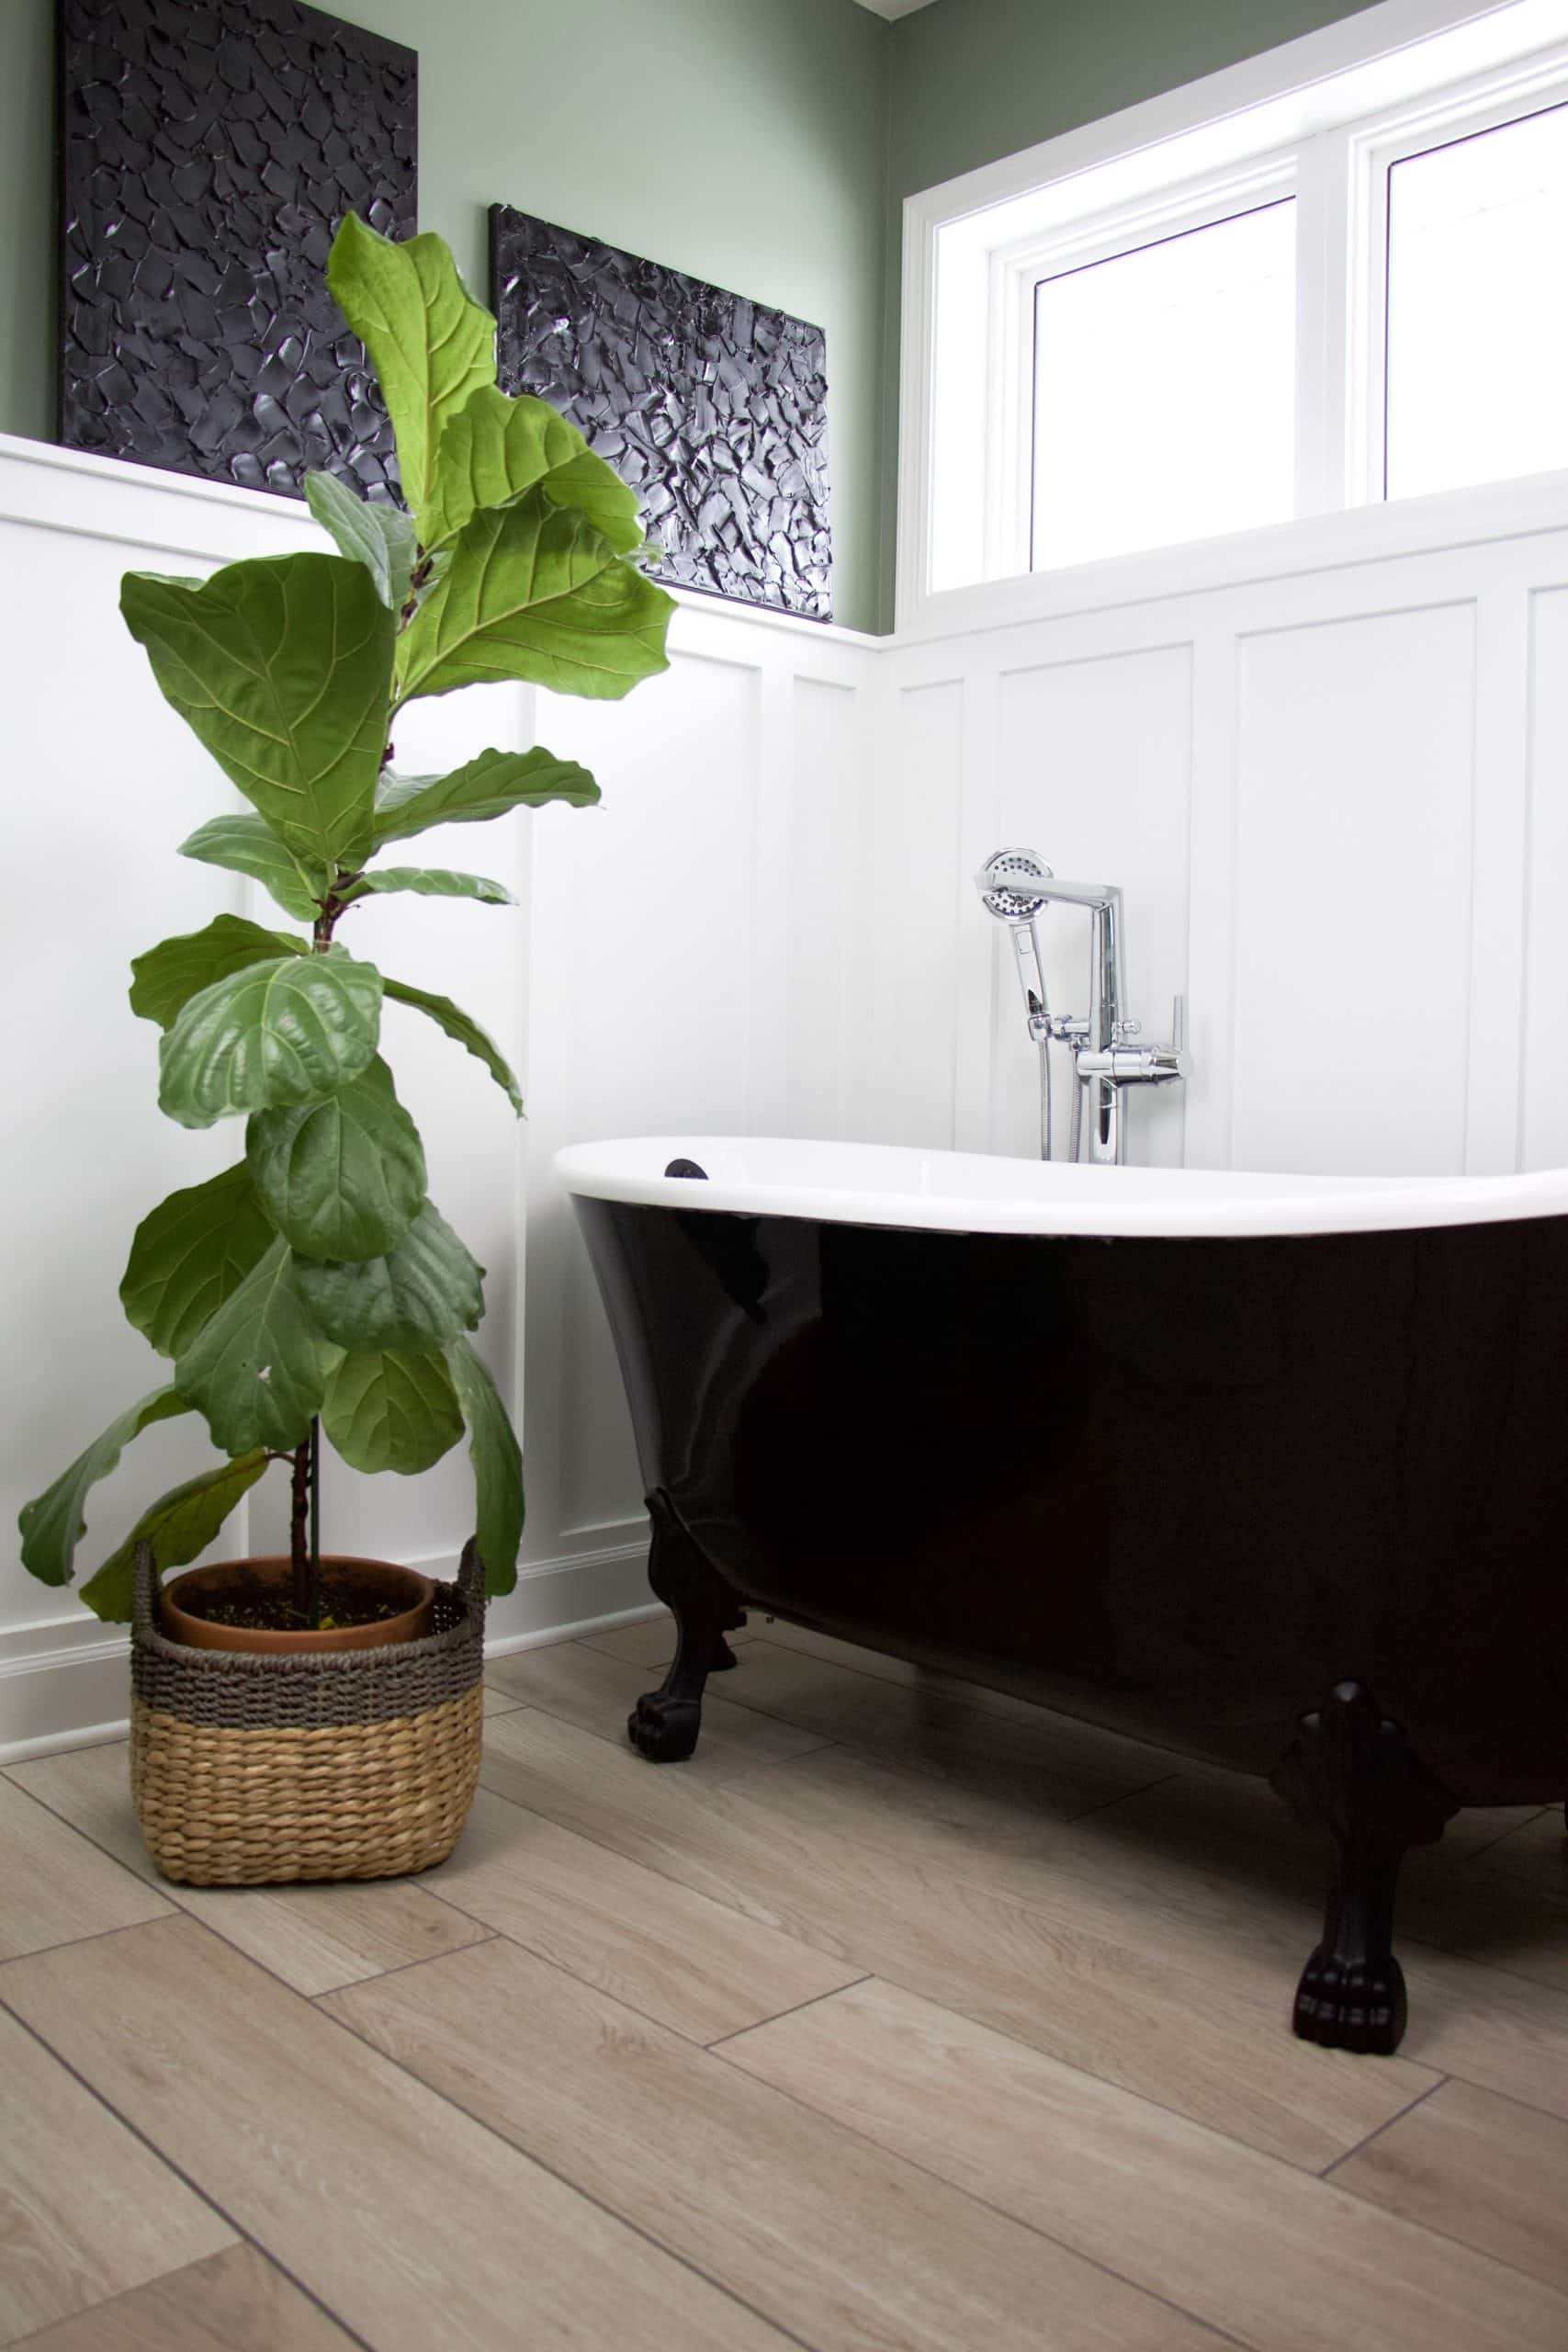 clawfoot tub with plant and tile floor